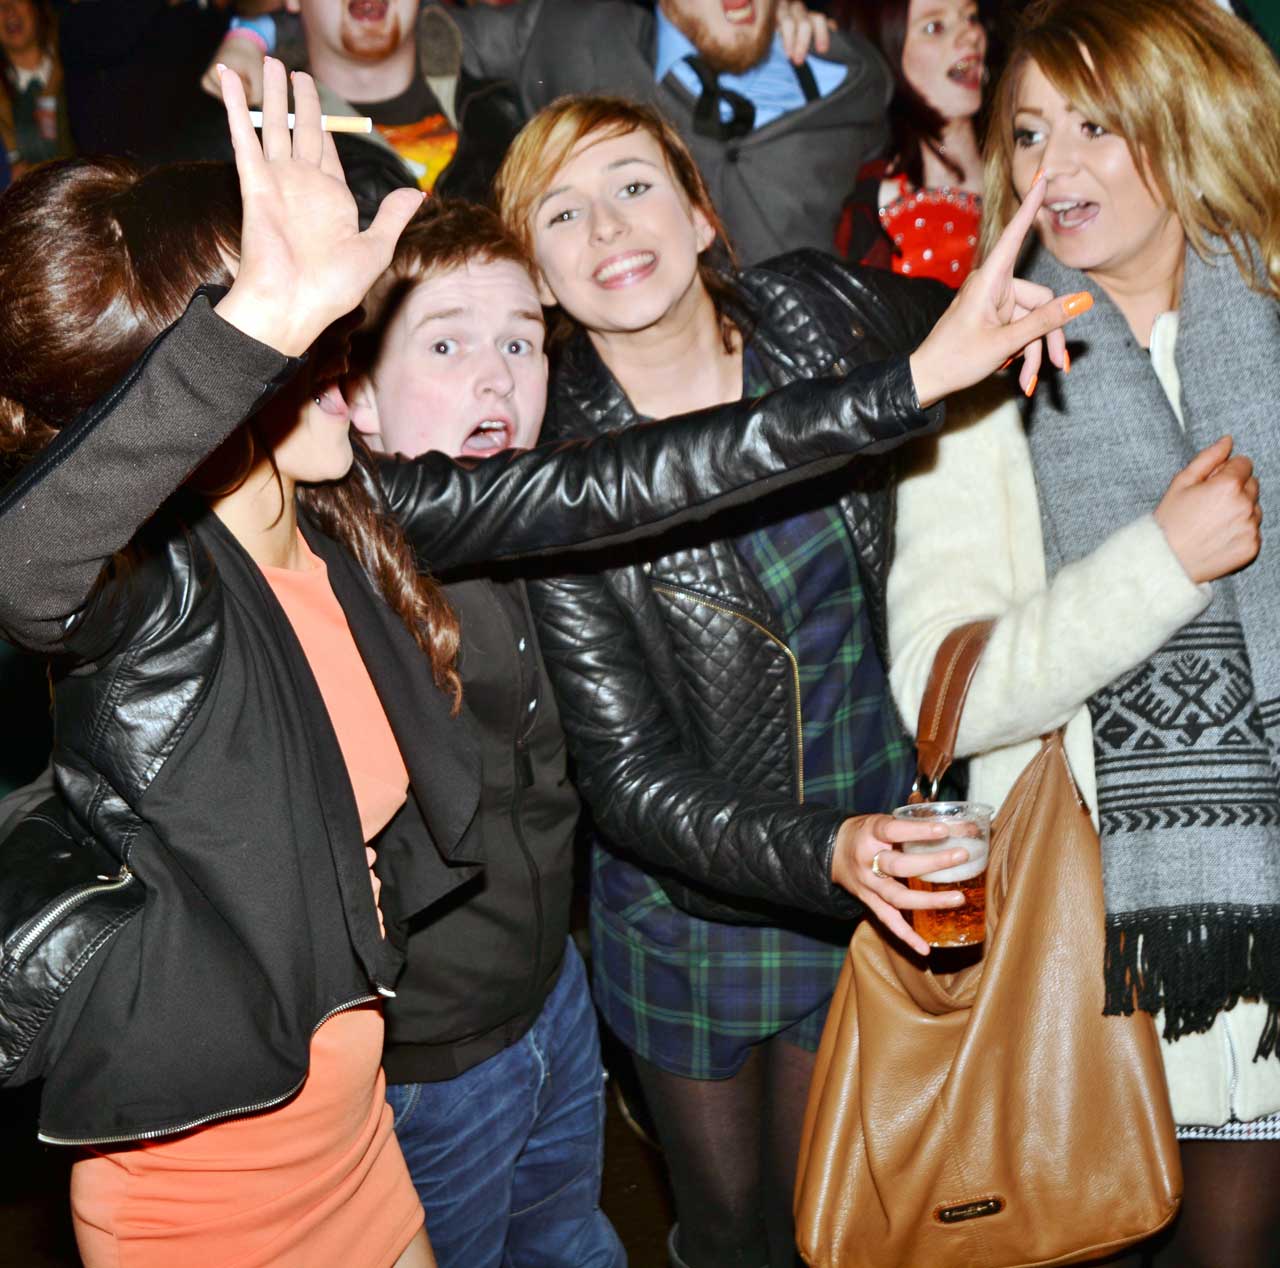 Photo: Hogmanay Party At Wick To Welcome 2015